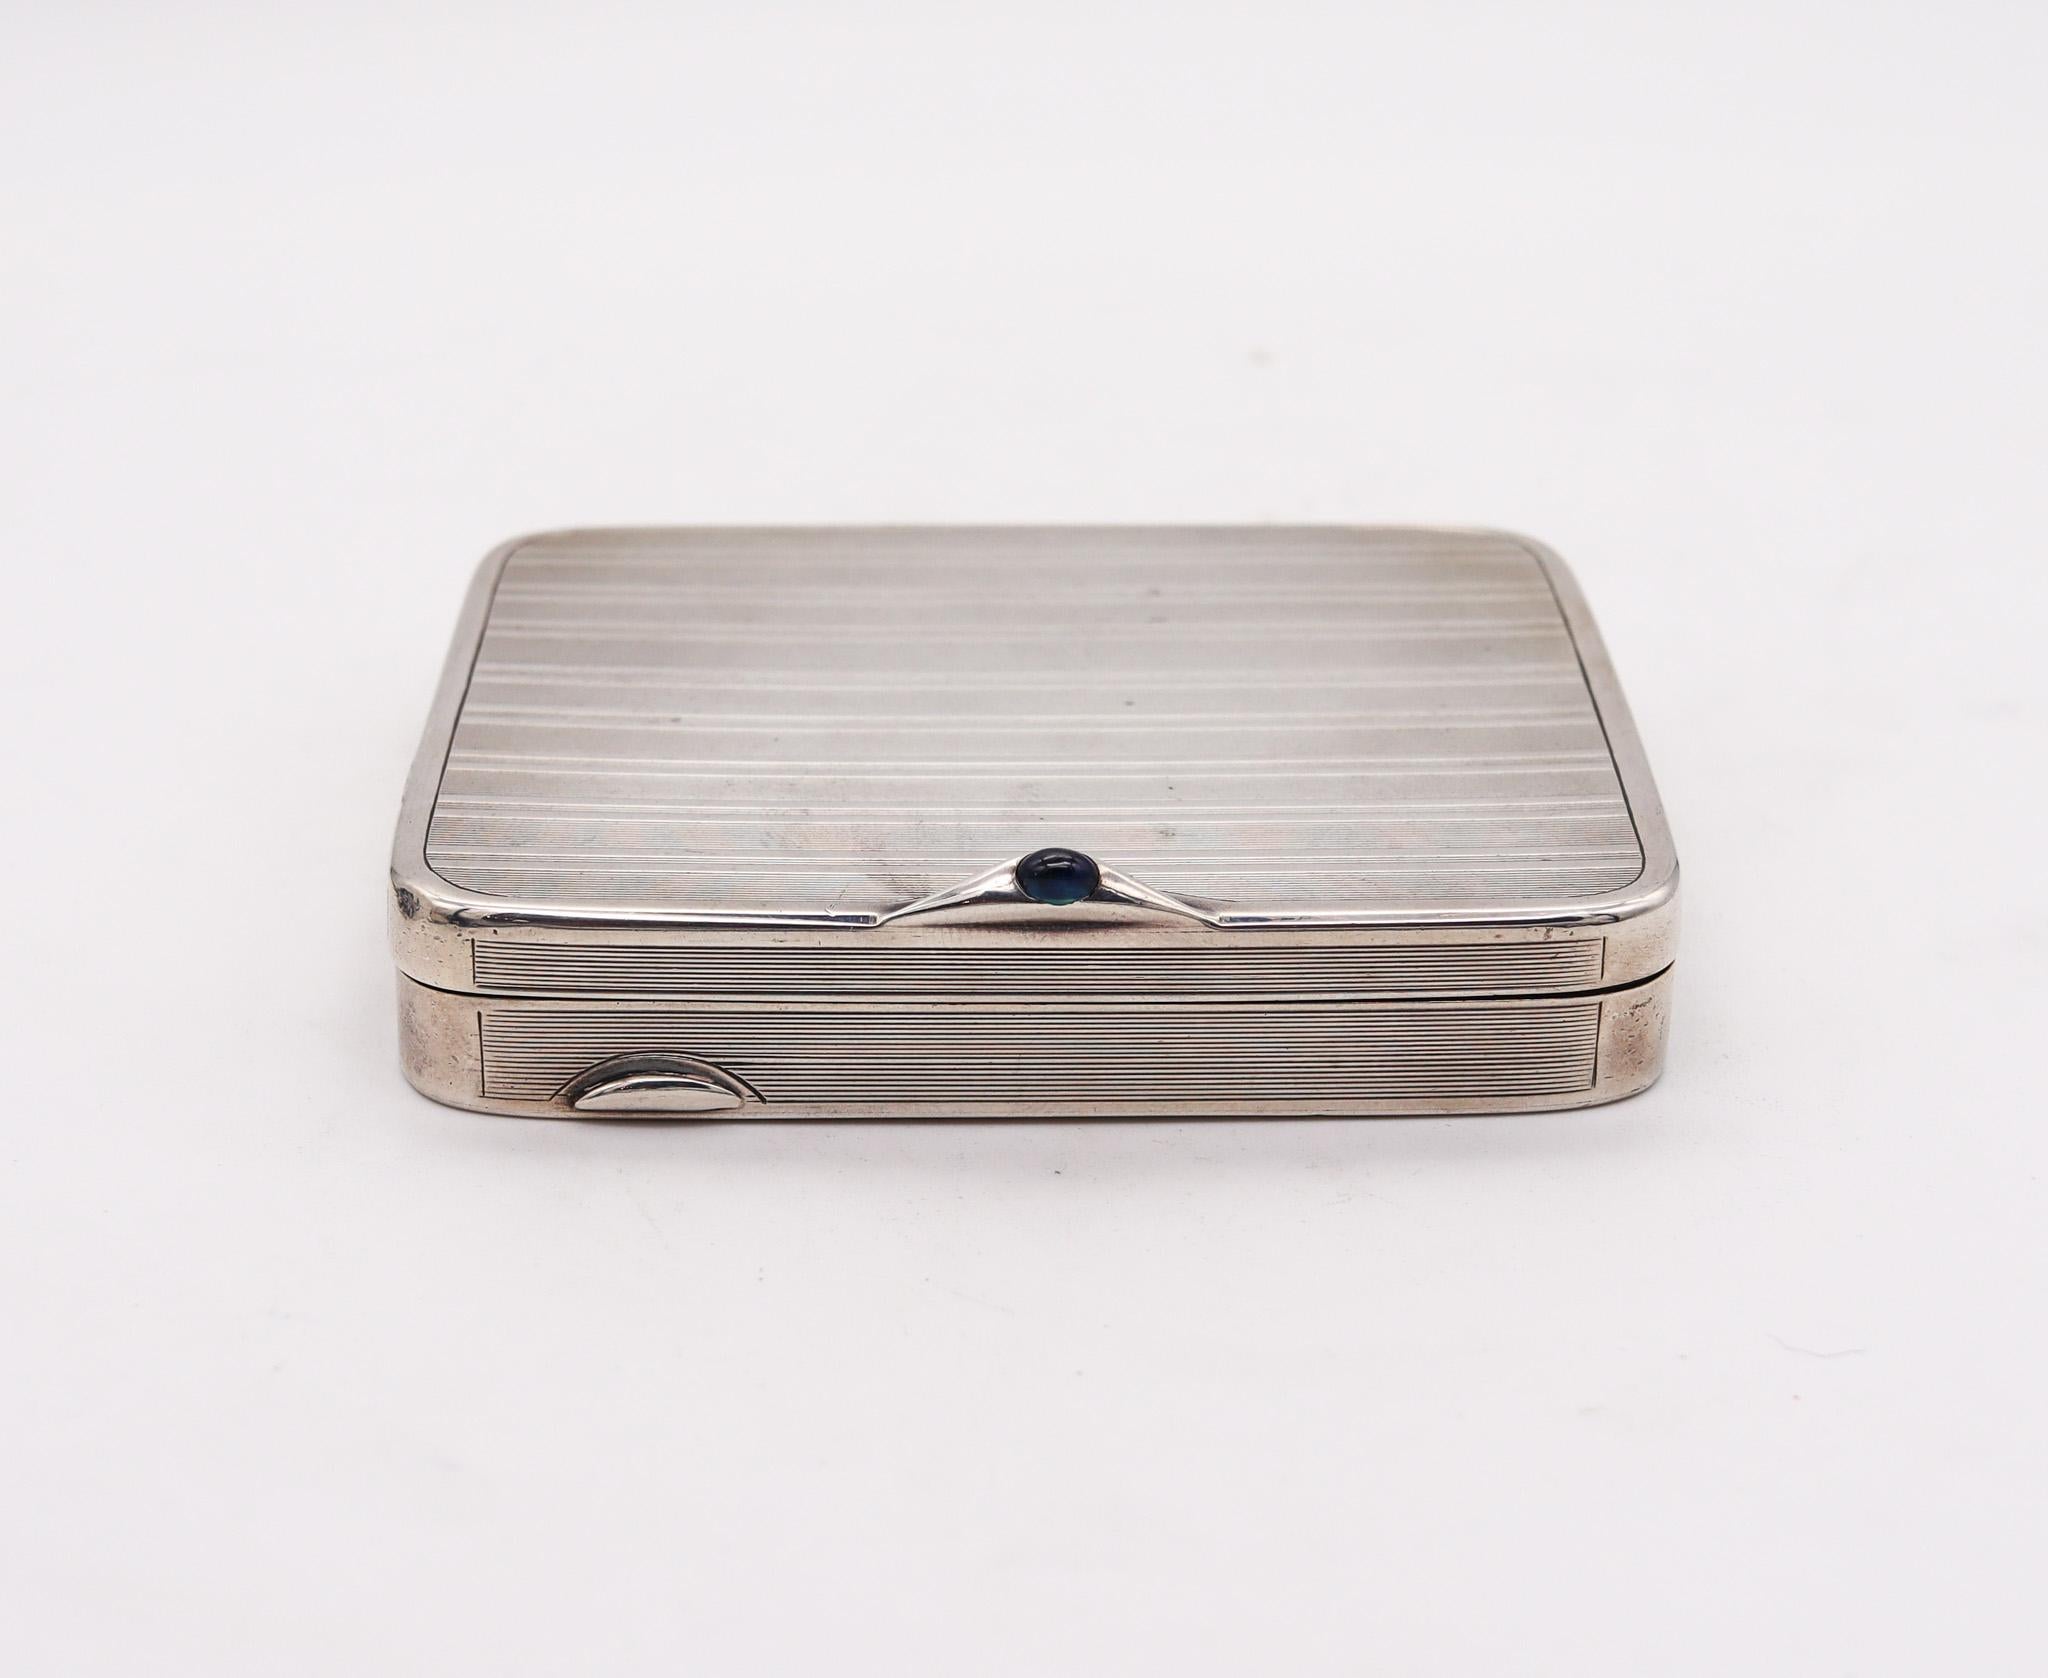 A hinged box designed by Ernest Cambeau.

A beautiful hinged box, created in Paris France by the silversmith Ernest Cambeau, back in the 1920. This box has been crafted in a cushion shape in solid sterling silver with a finesse of .950/.999. It is